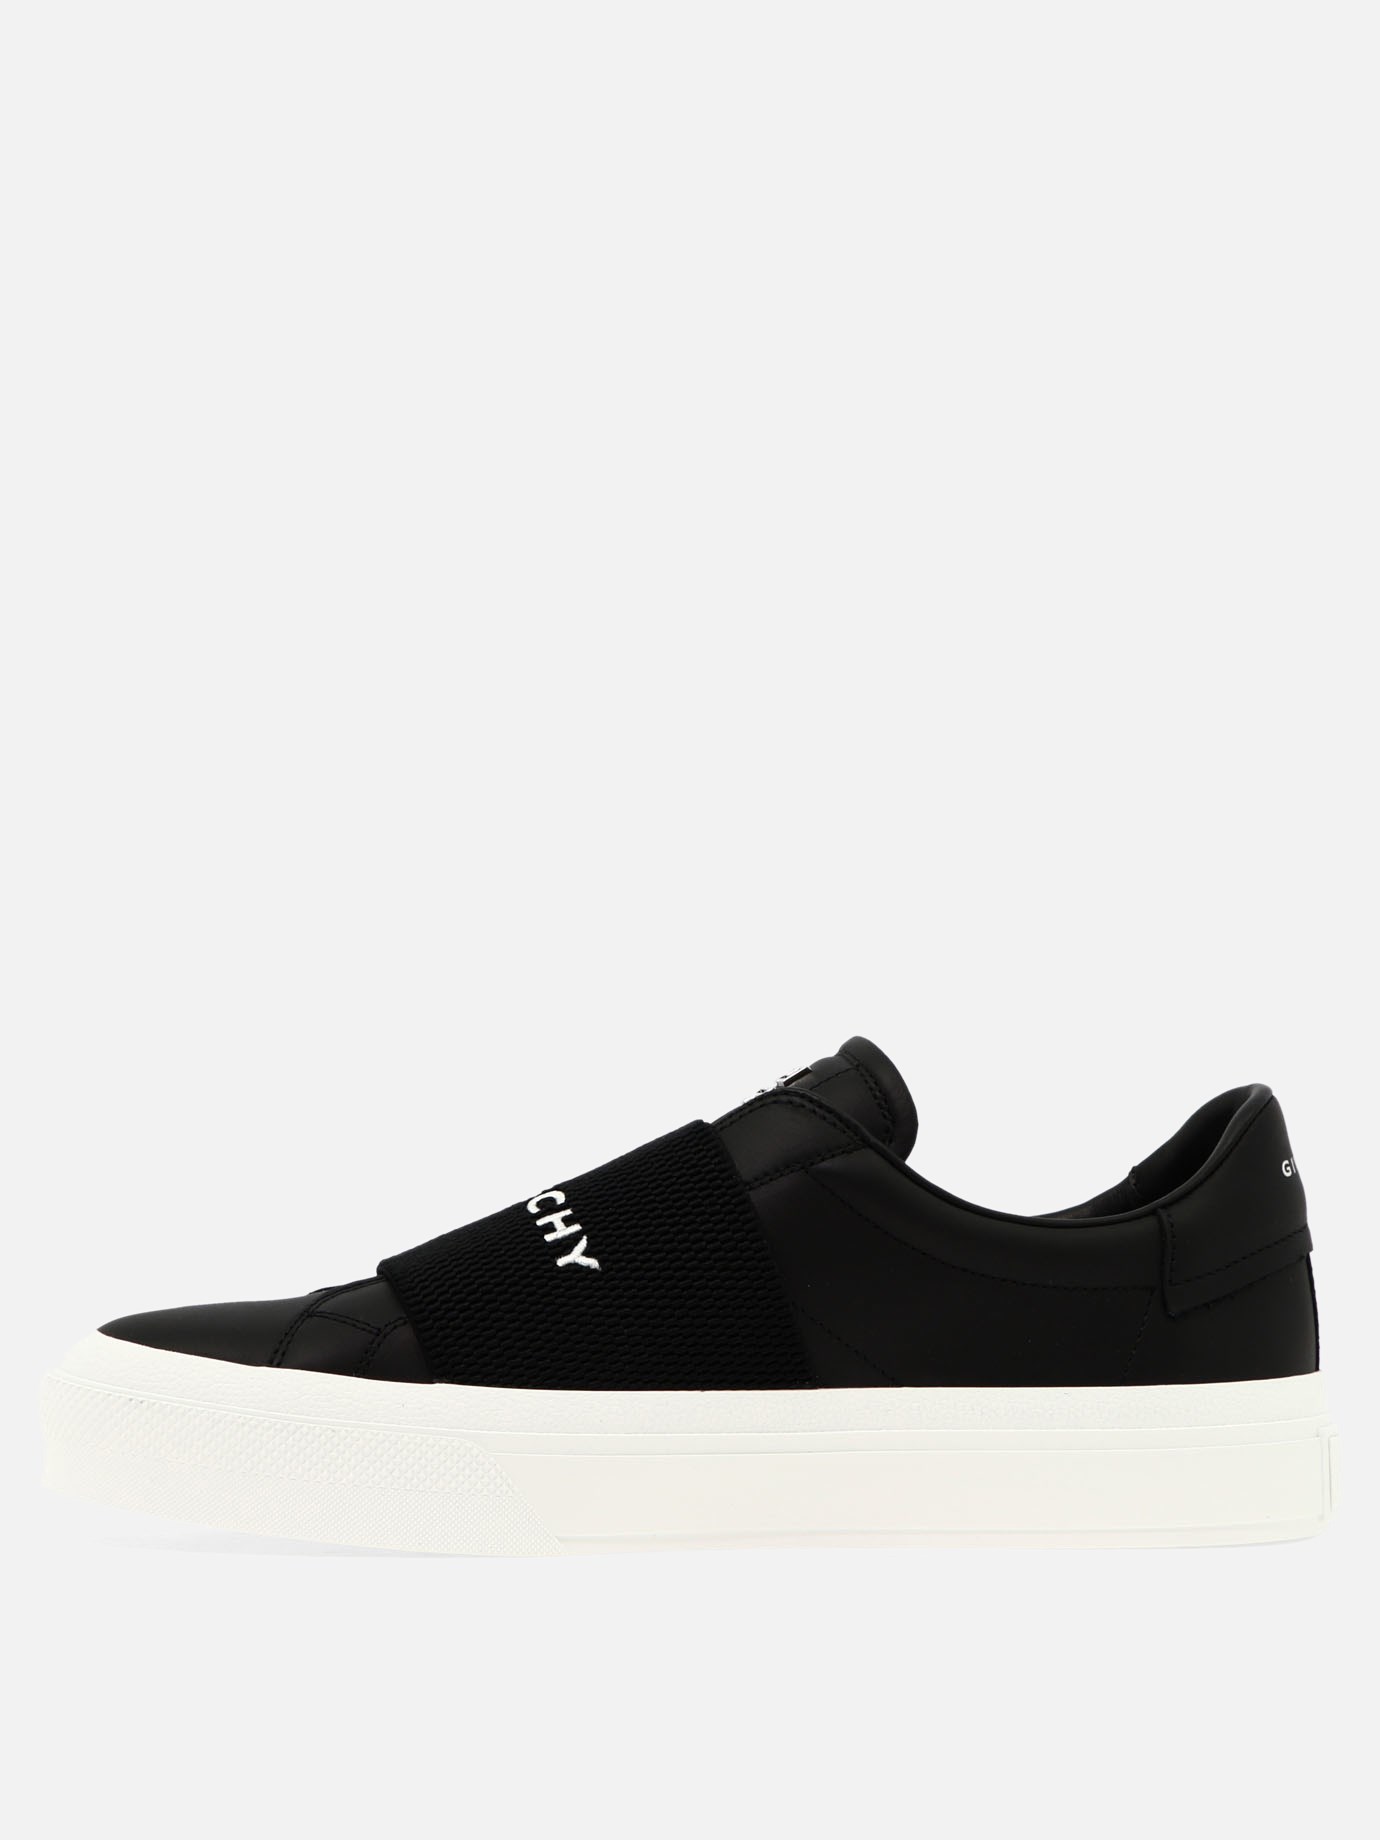  New City  sneakers by Givenchy